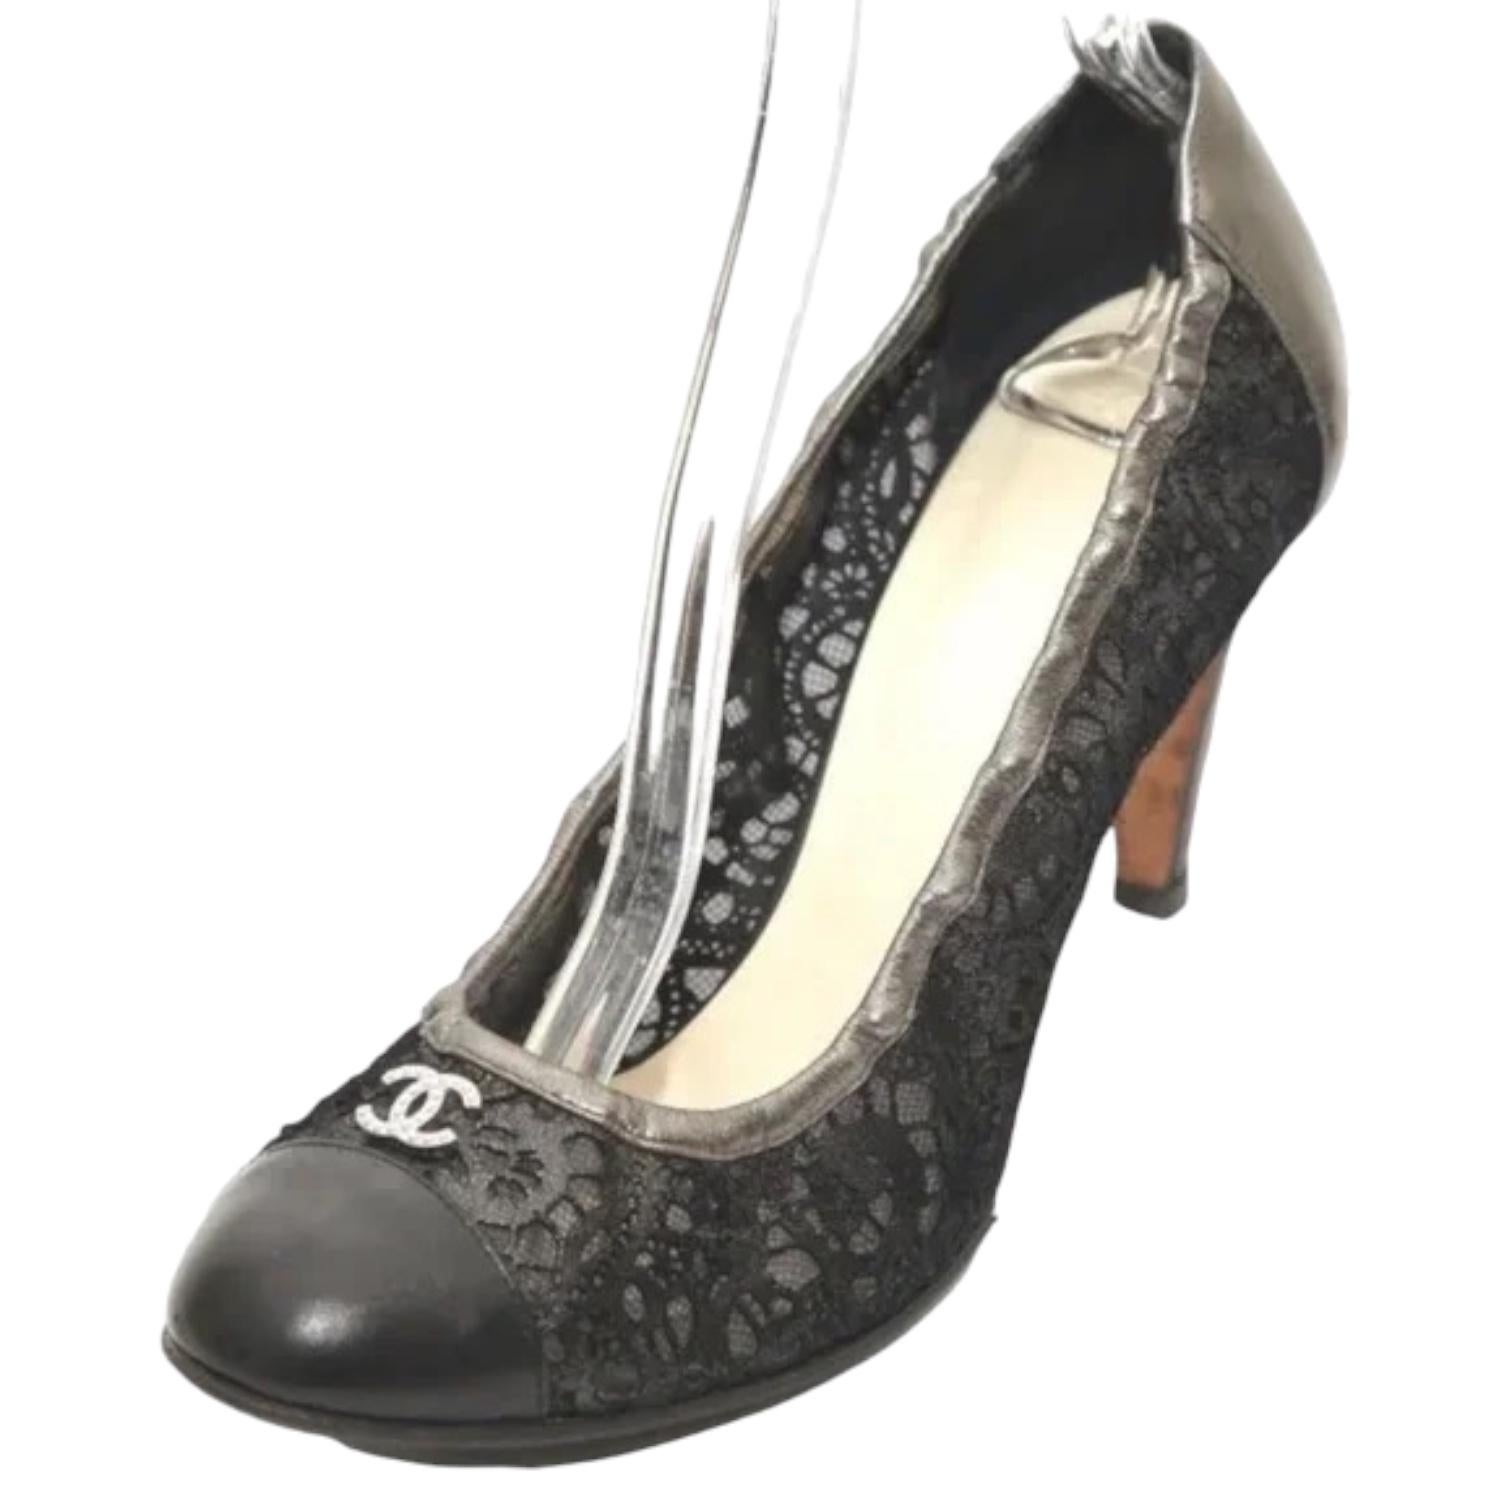 CHANEL Black Pumps Gunmetal Stretch CC Pearls Heels Leather Brocade Sz 40 In Fair Condition For Sale In Hollywood, FL